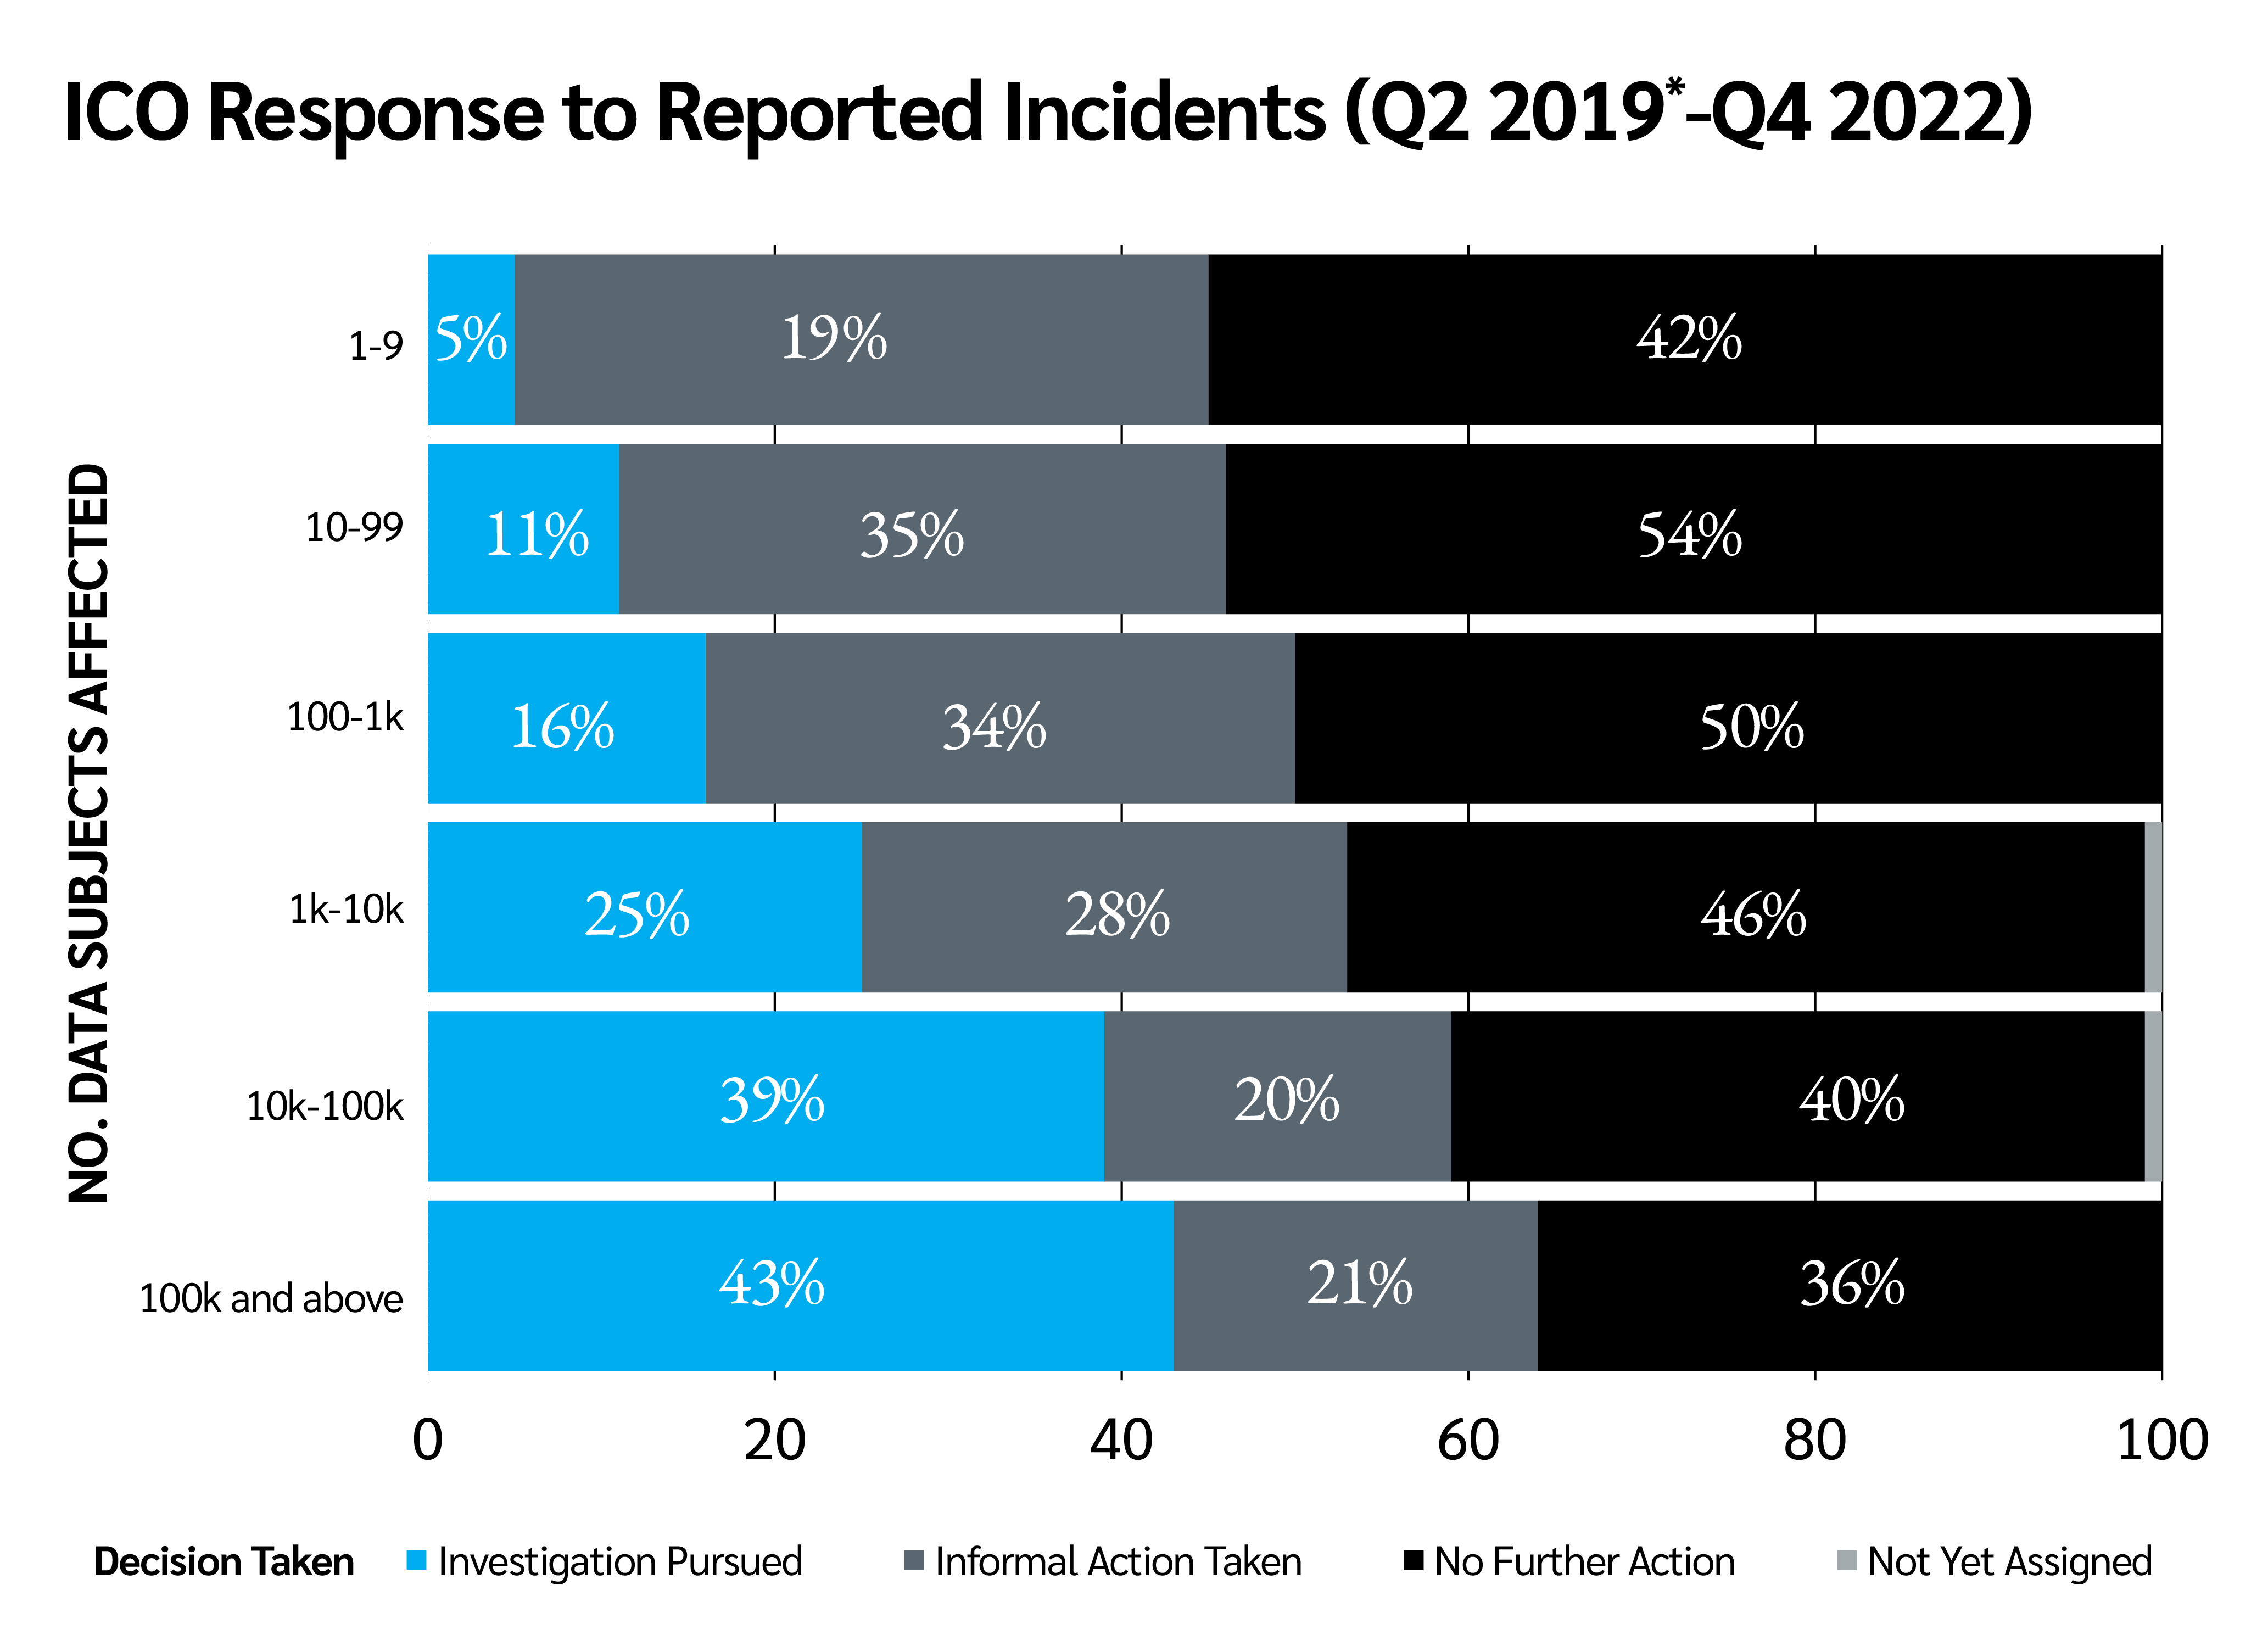 ICO Response to reported incidents 2019-20222